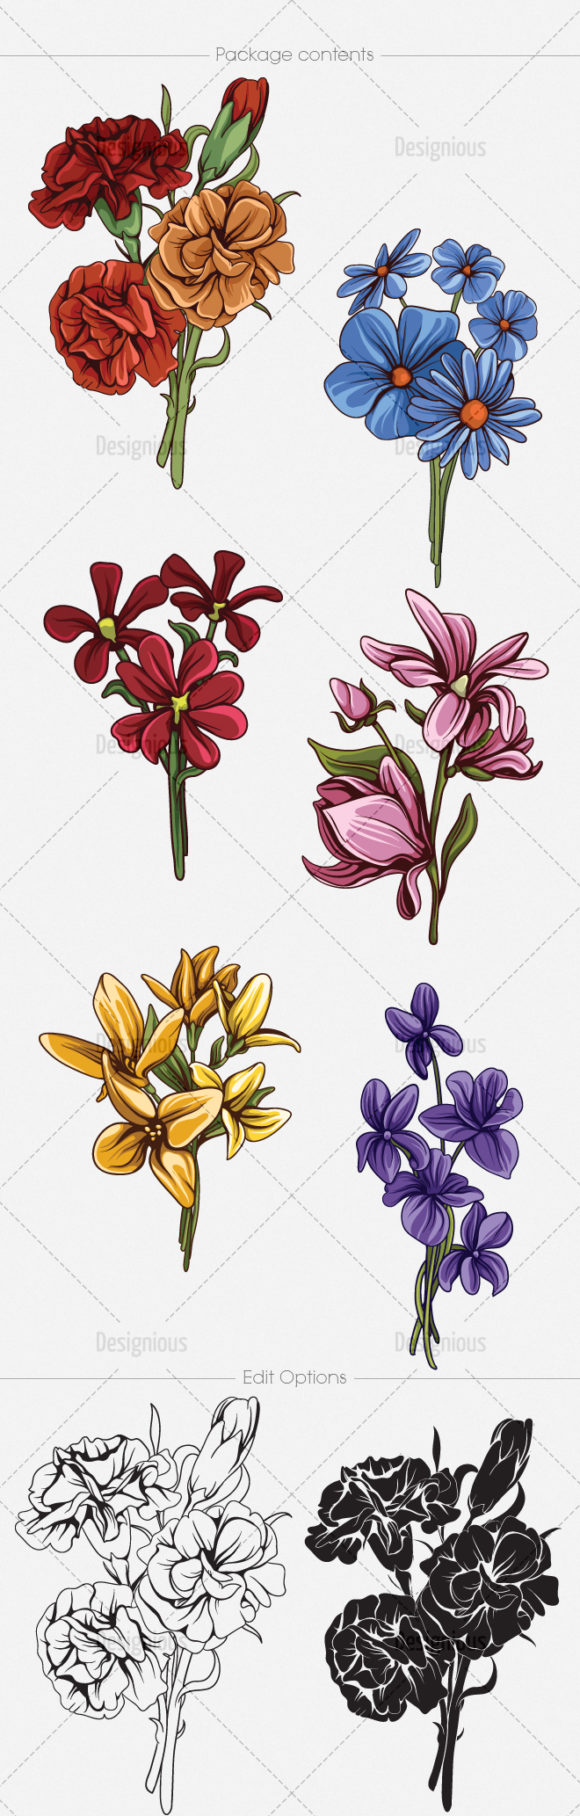 Floral Vector Pack 143 2